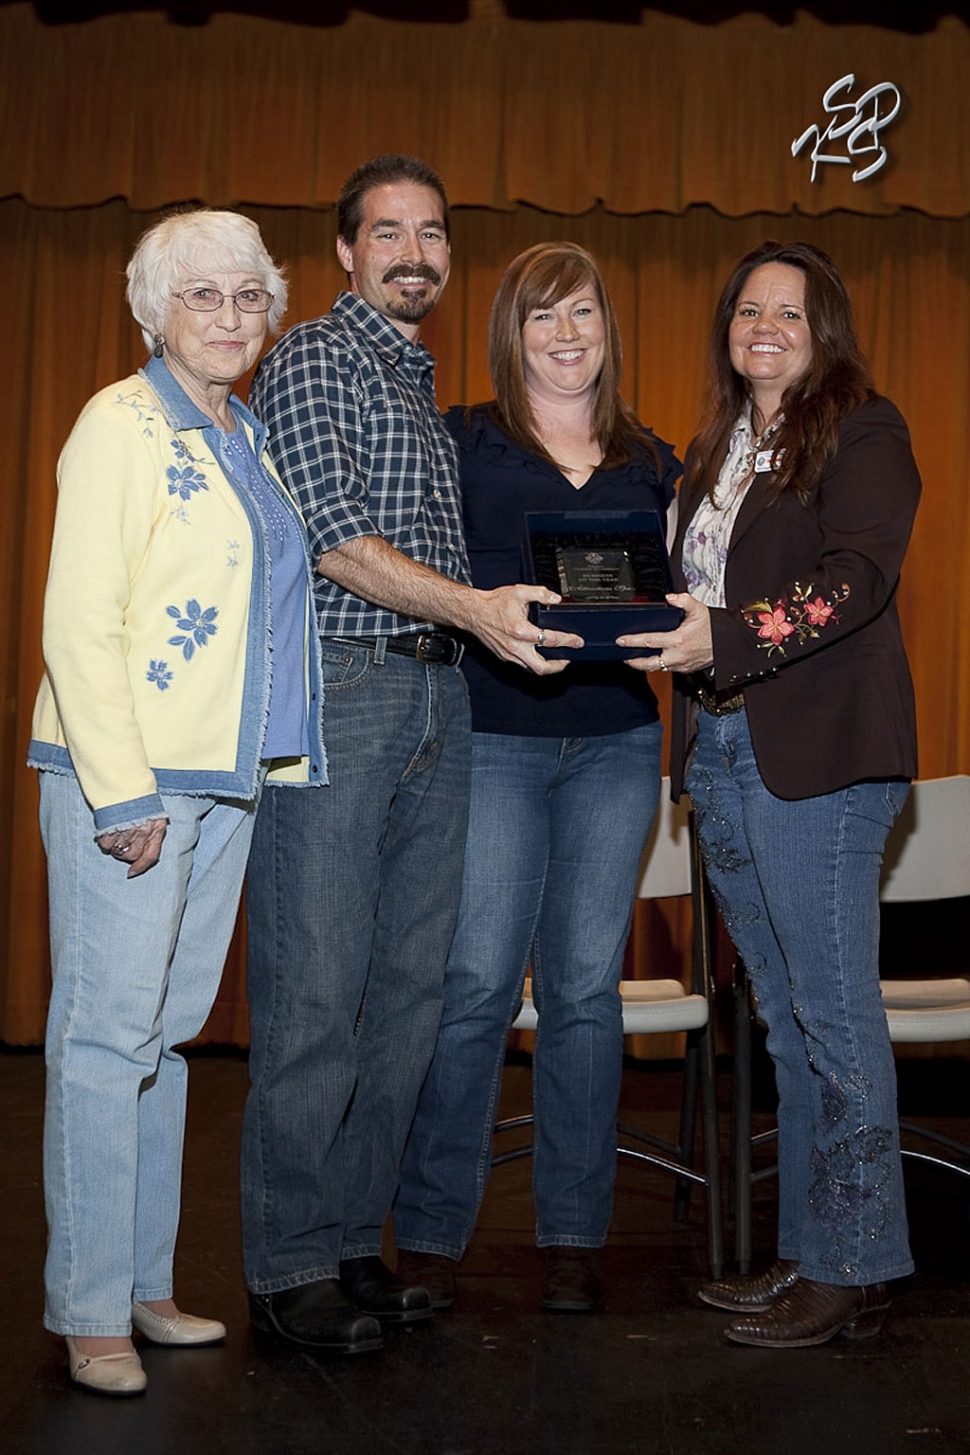 Thursday night at the The Community Awards dinner Attractions Spa was presented “The Business of the Year” award. It was presented by April and Sean Hastings (center), grandmother Mary Tipps (left). Also pictured is Cindy Jackson. Community Awards dinner photos courtesy of KSSP Photographic Studios.